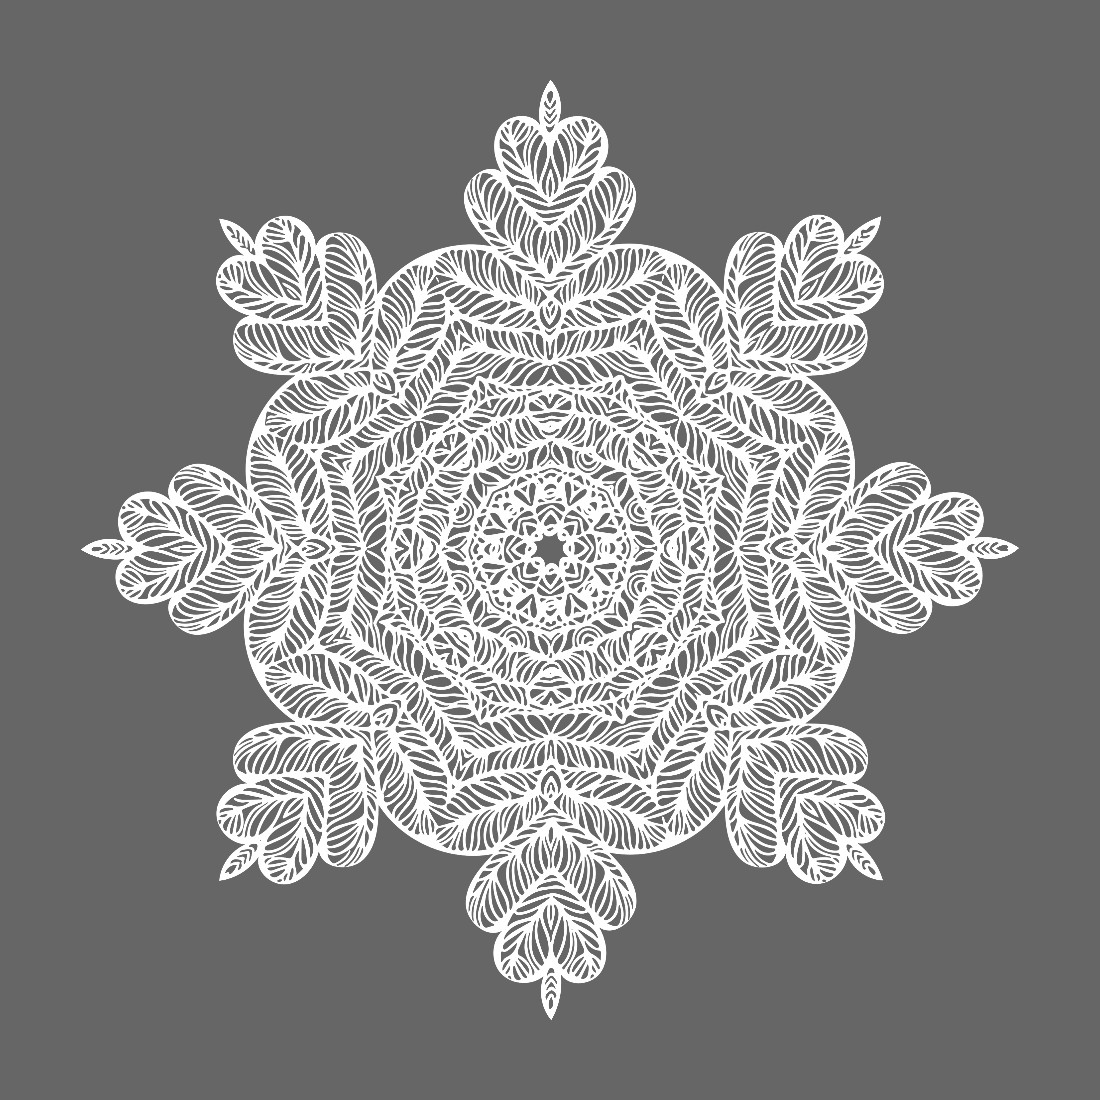 White Lined Snowflake Cutout Vintage Decor Perfect for Any Old Fashioned Craft Projects.